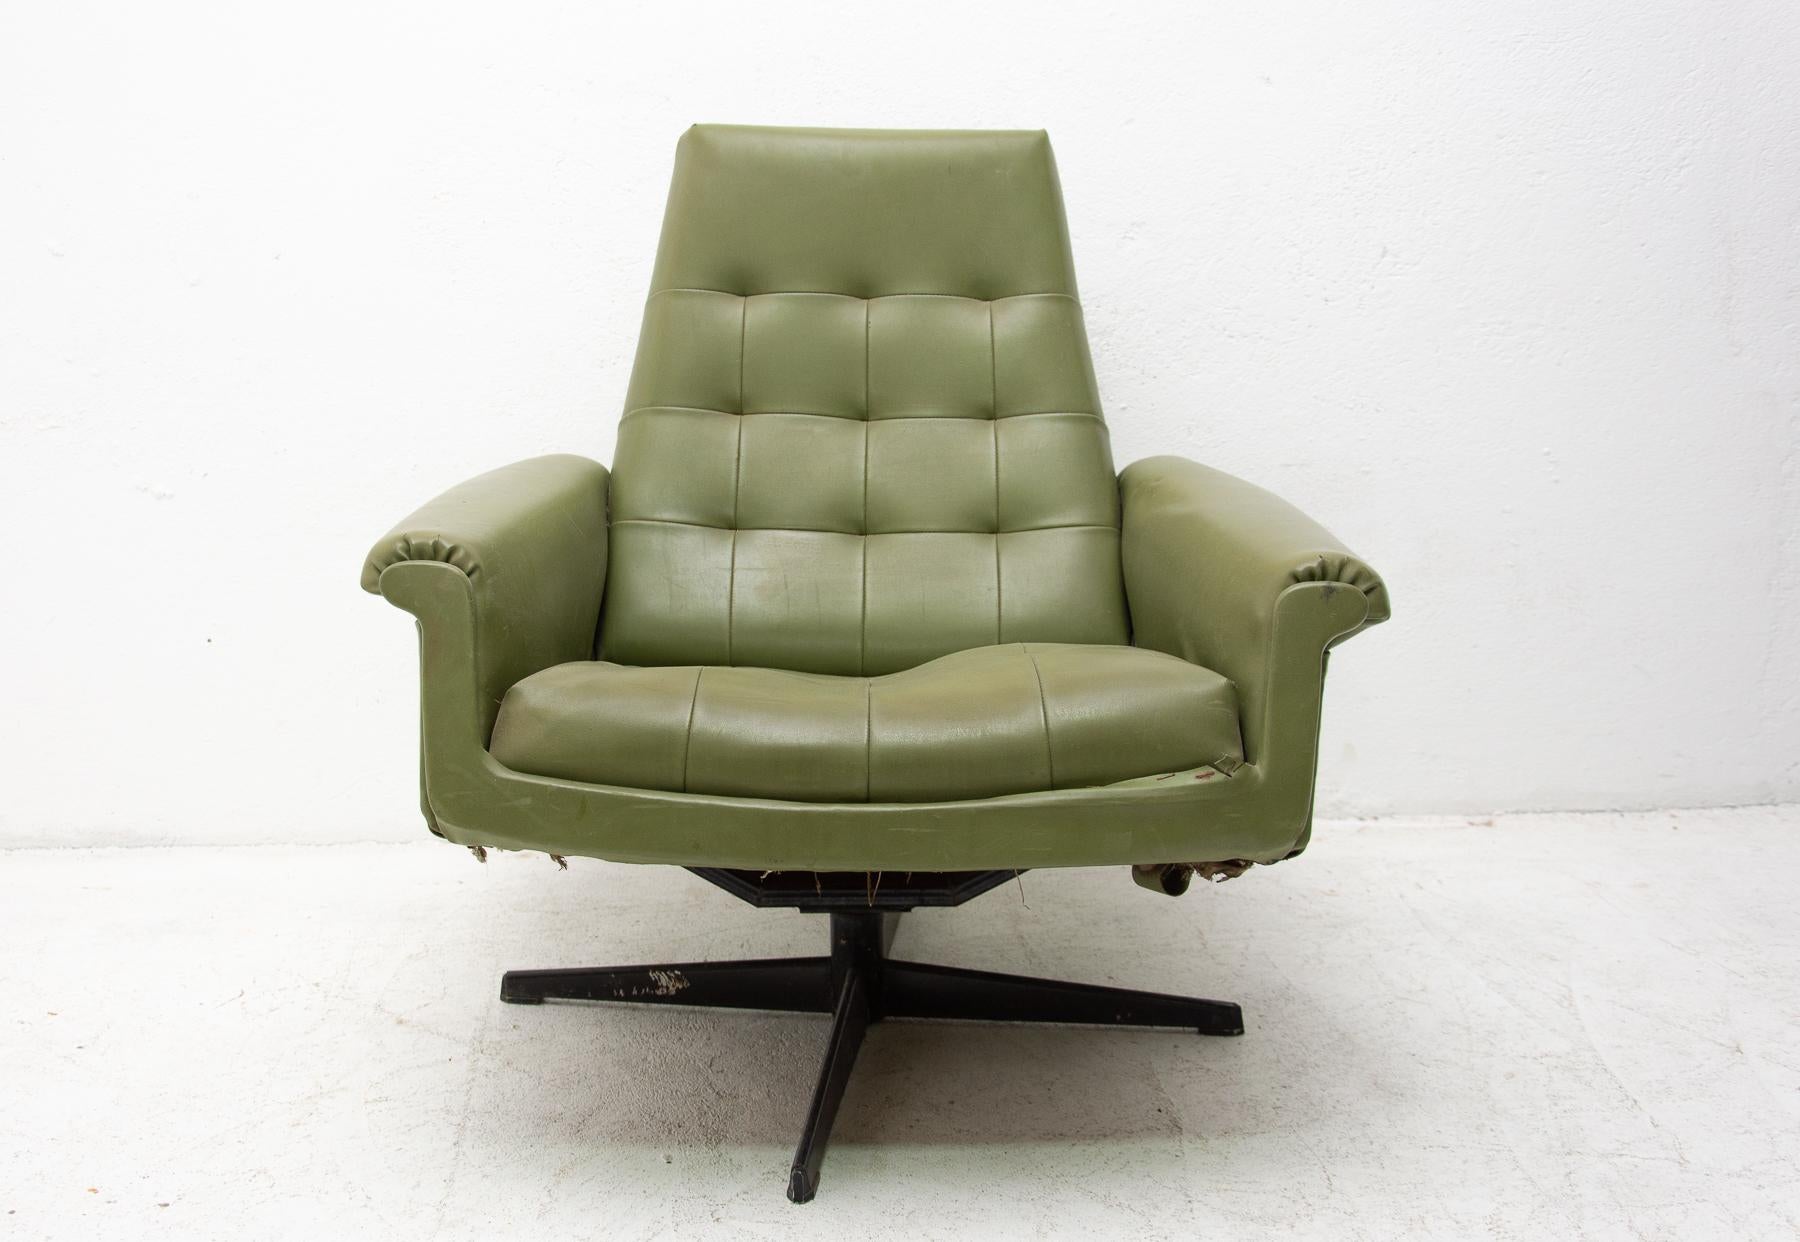 This armchair was made in the former Czechoslovakia in the 1970 as a part of living room set consists of one sofa, pair of swivel armchairs and stool. The chair is upholstered with green leatherette. The legs are made from iron. All in original